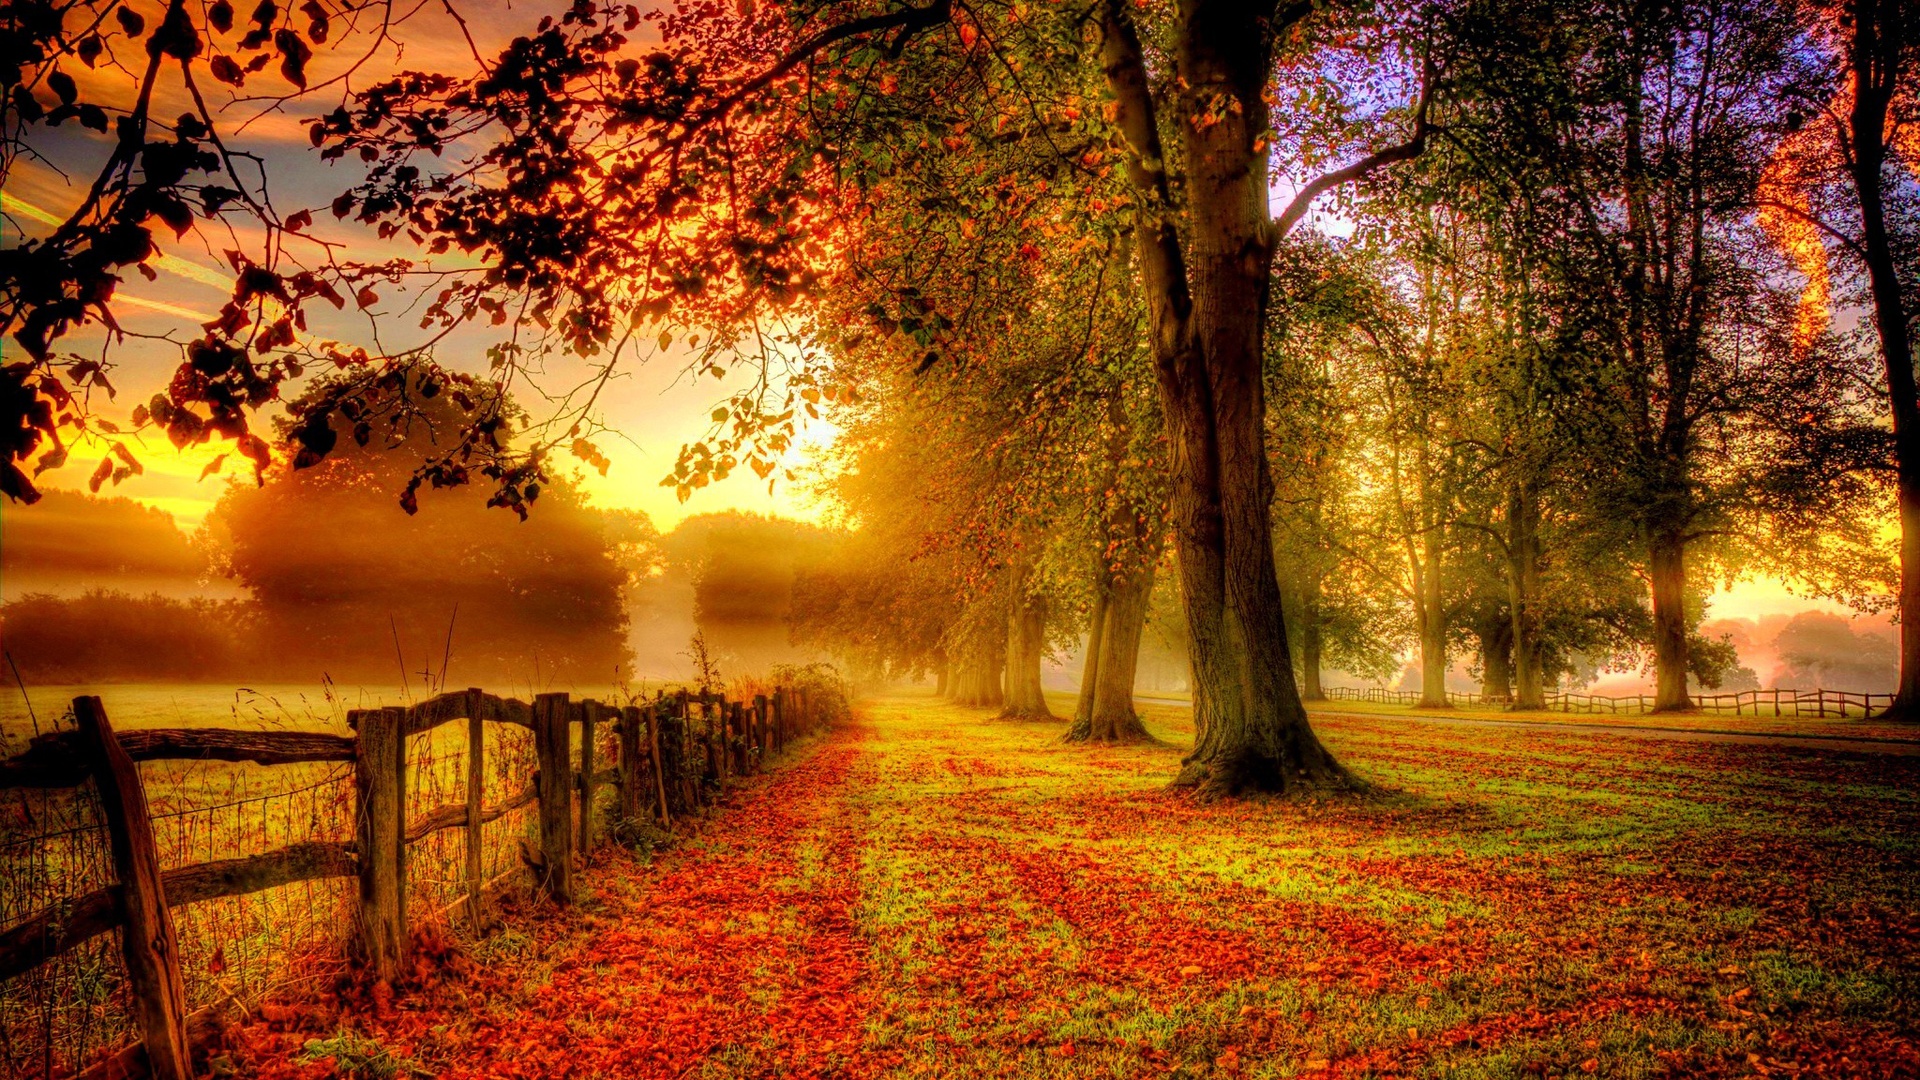 photography, hdr, fall, fence iphone wallpaper